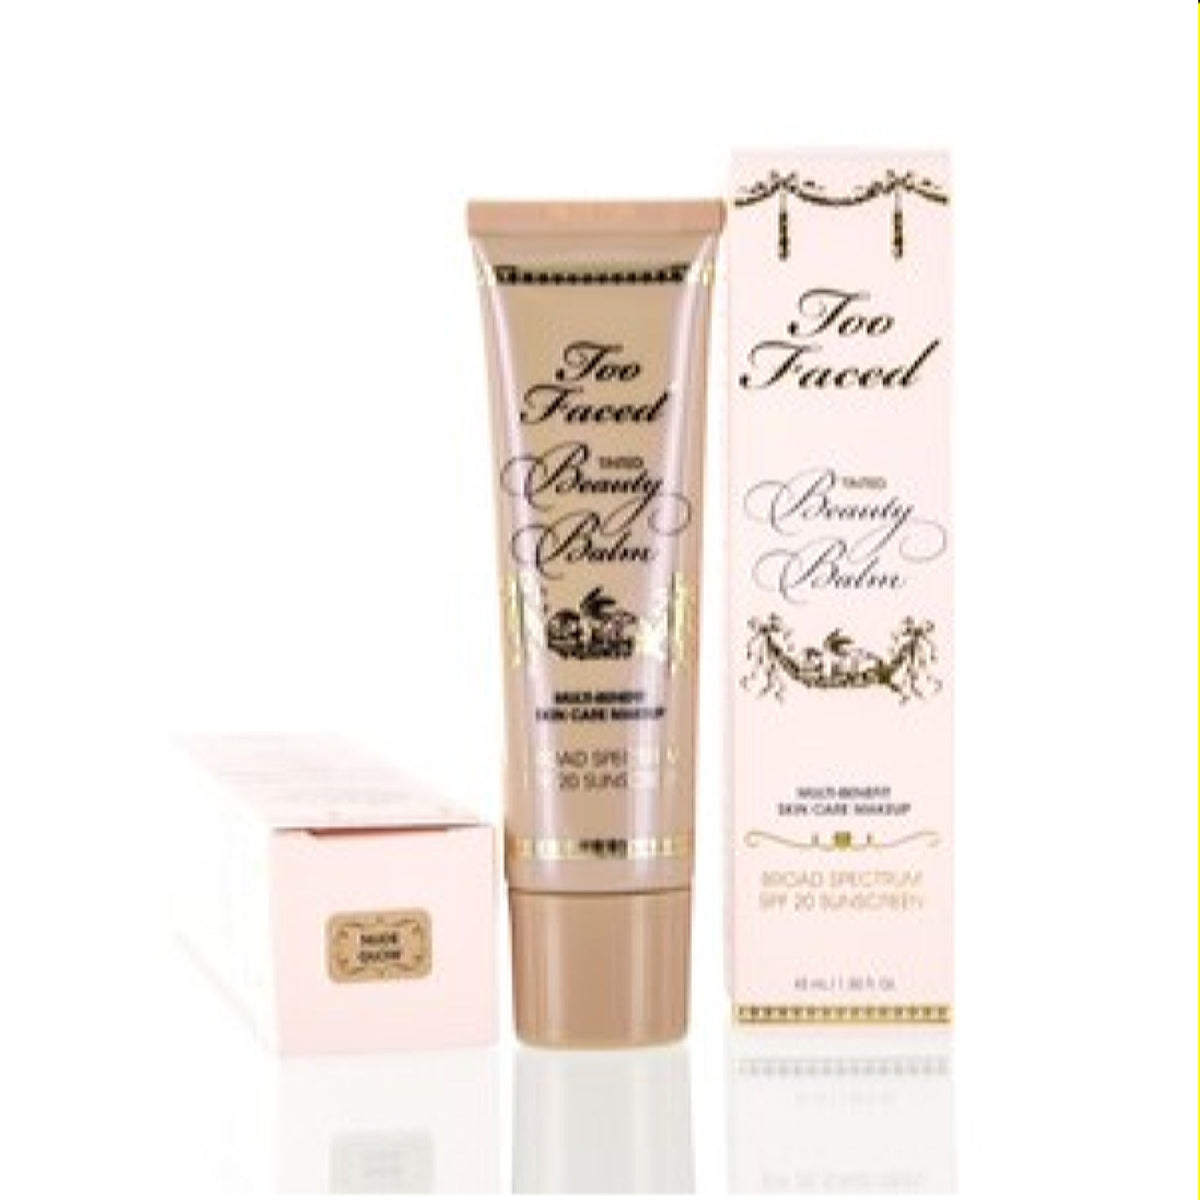 Too Faced Beauty Balm Tinted Cream Foundation Nude Glow 1.5 Oz (45 Ml) 70081